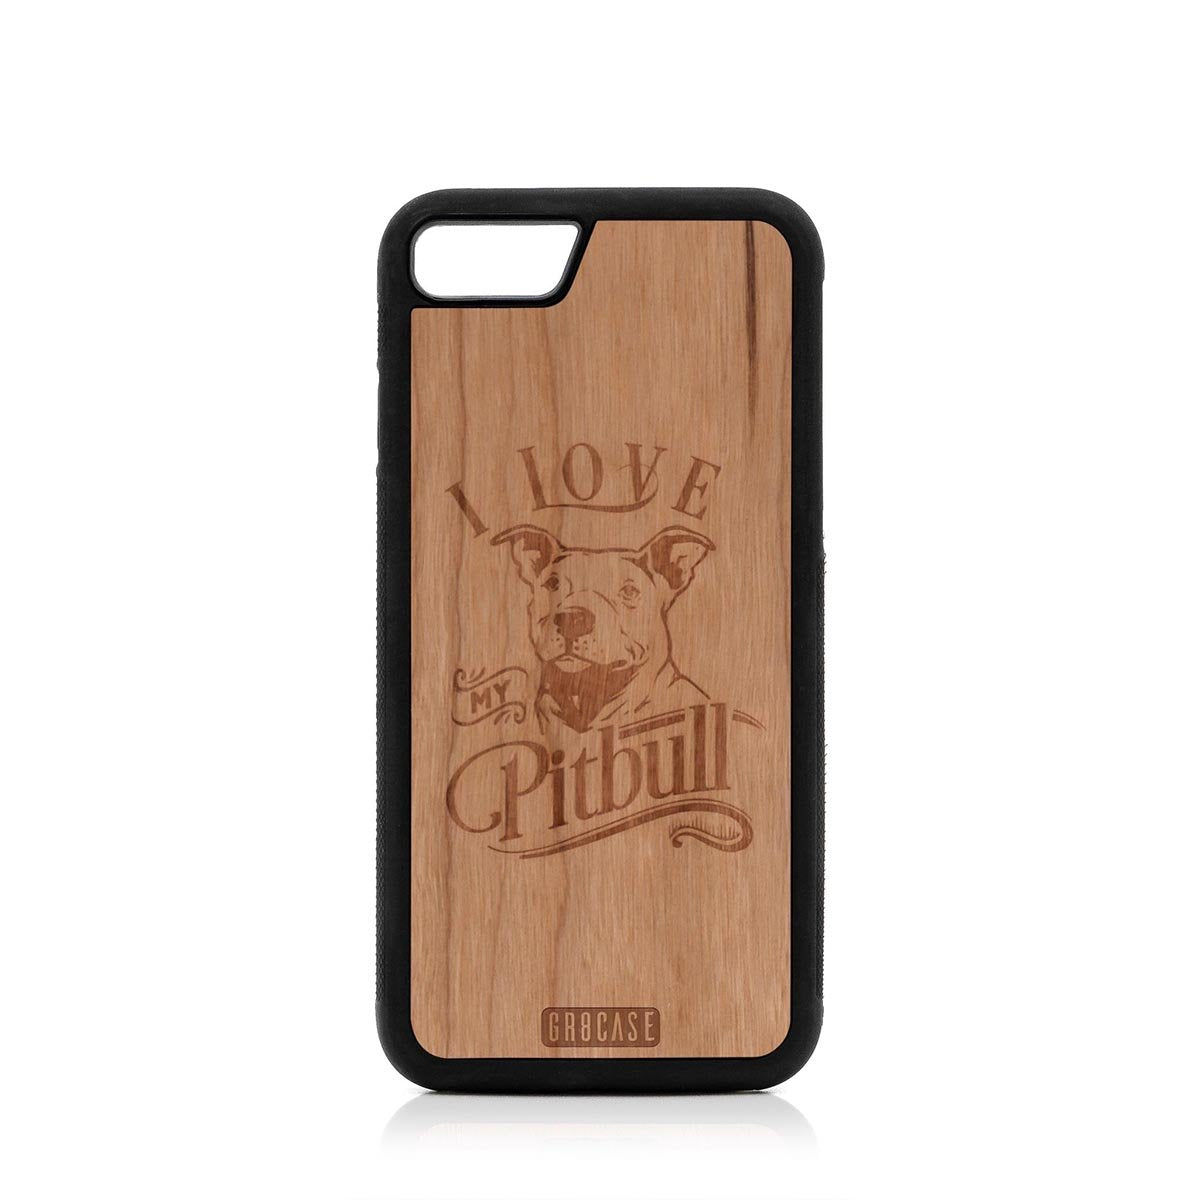 I Love My Pitbull Design Wood Case For iPhone SE 2020 by GR8CASE